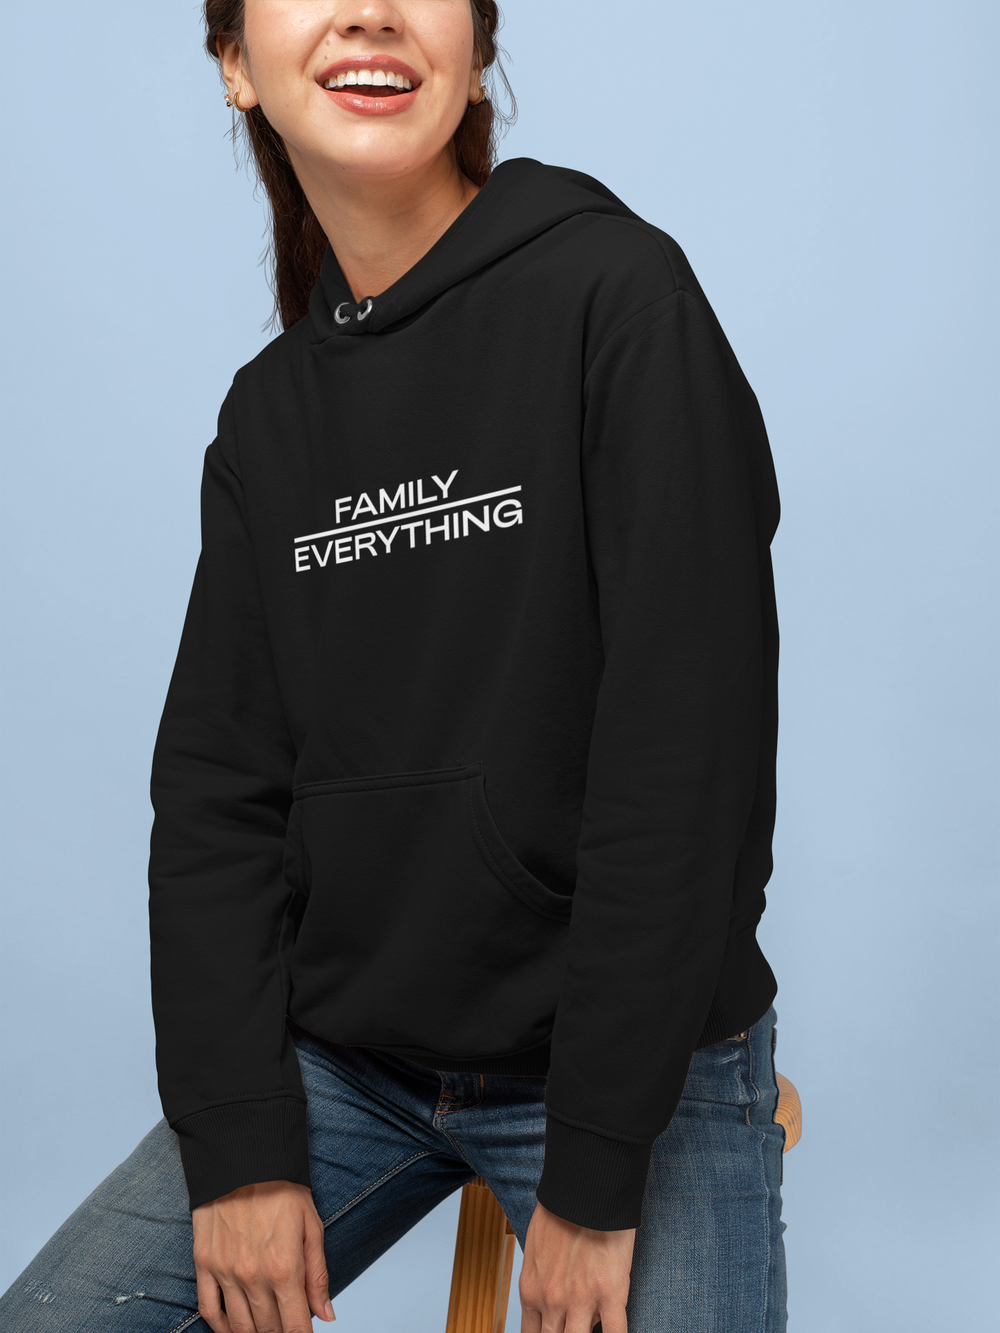 Family over everything - Classic unisex hoodie